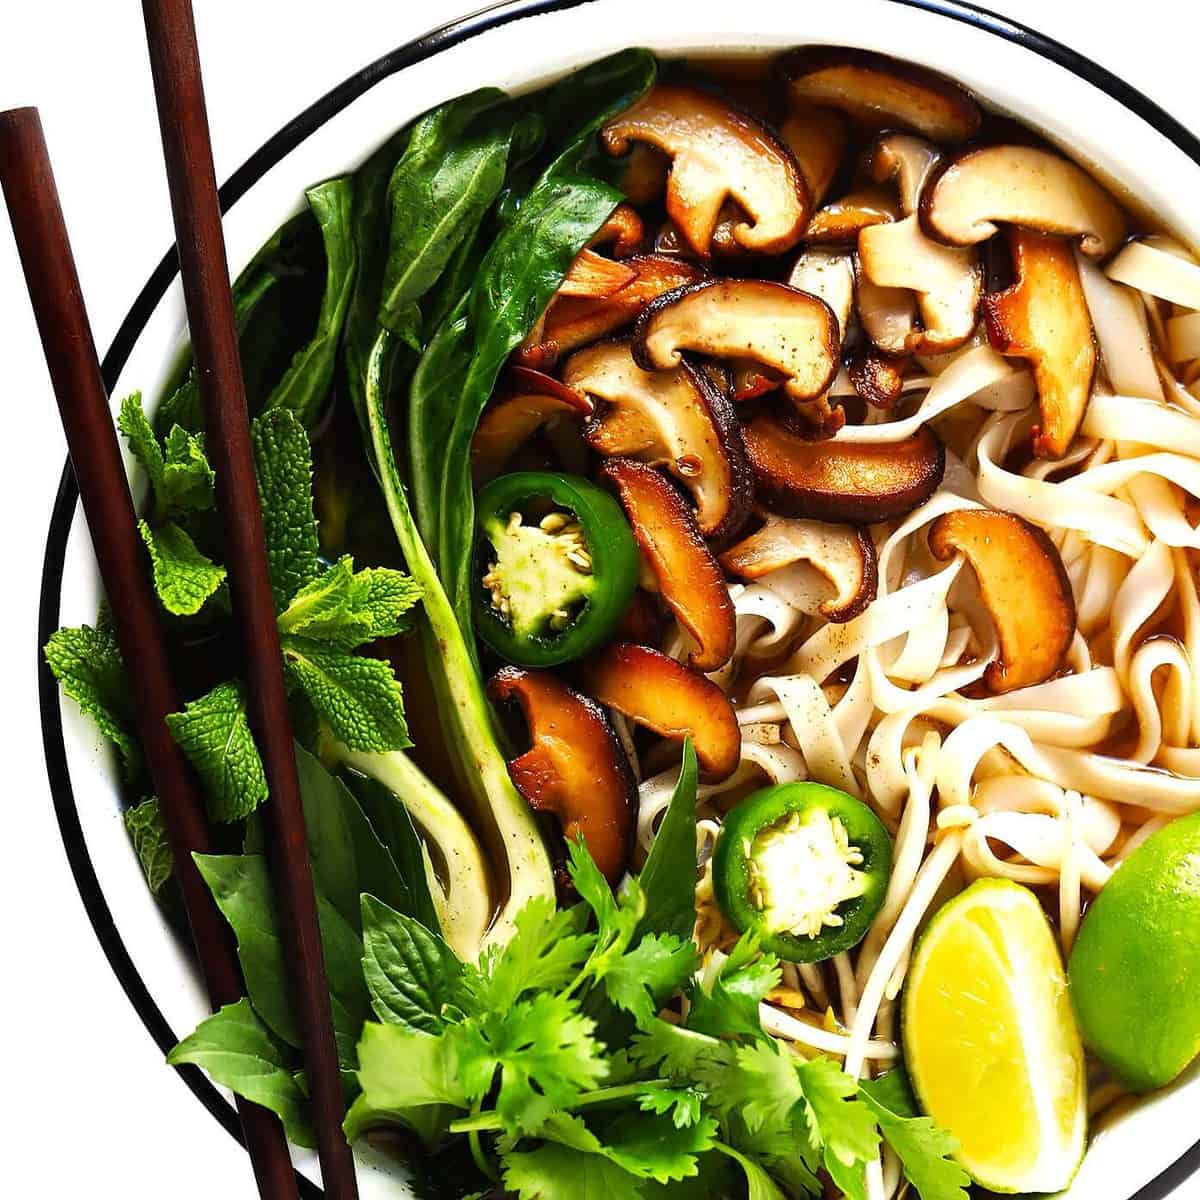  Discover the authentic flavors of Vietnam with this plant-based recipe.